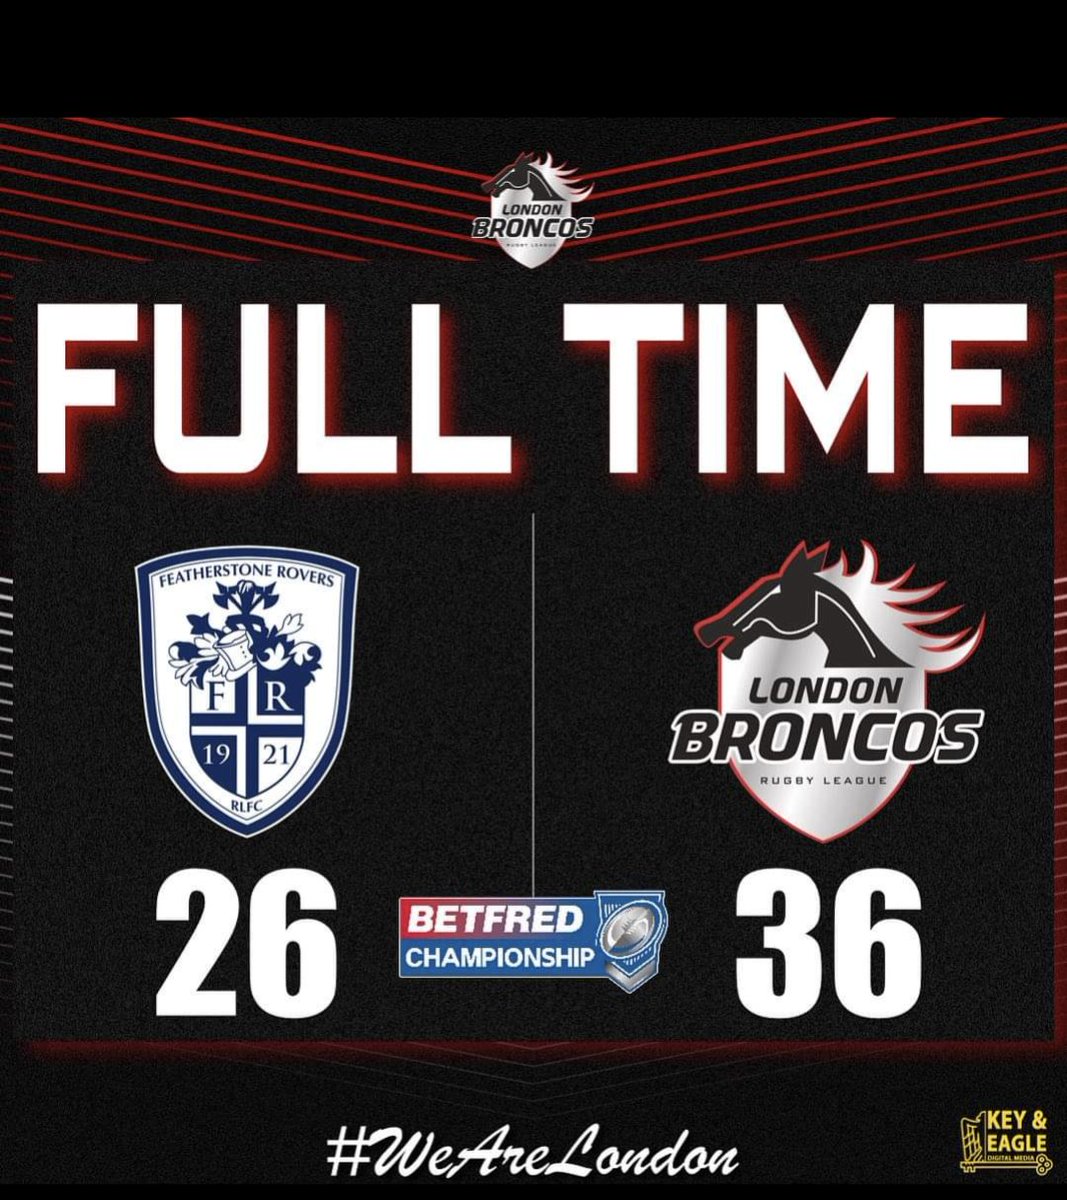 What a weekend! Andy Farrell is the man! I really hope the Irish bring home the cup. What a team! And how good are their fans! @LondonBroncosRL 👏👏 outstanding performance what a final next week promises to be V @TOXIII